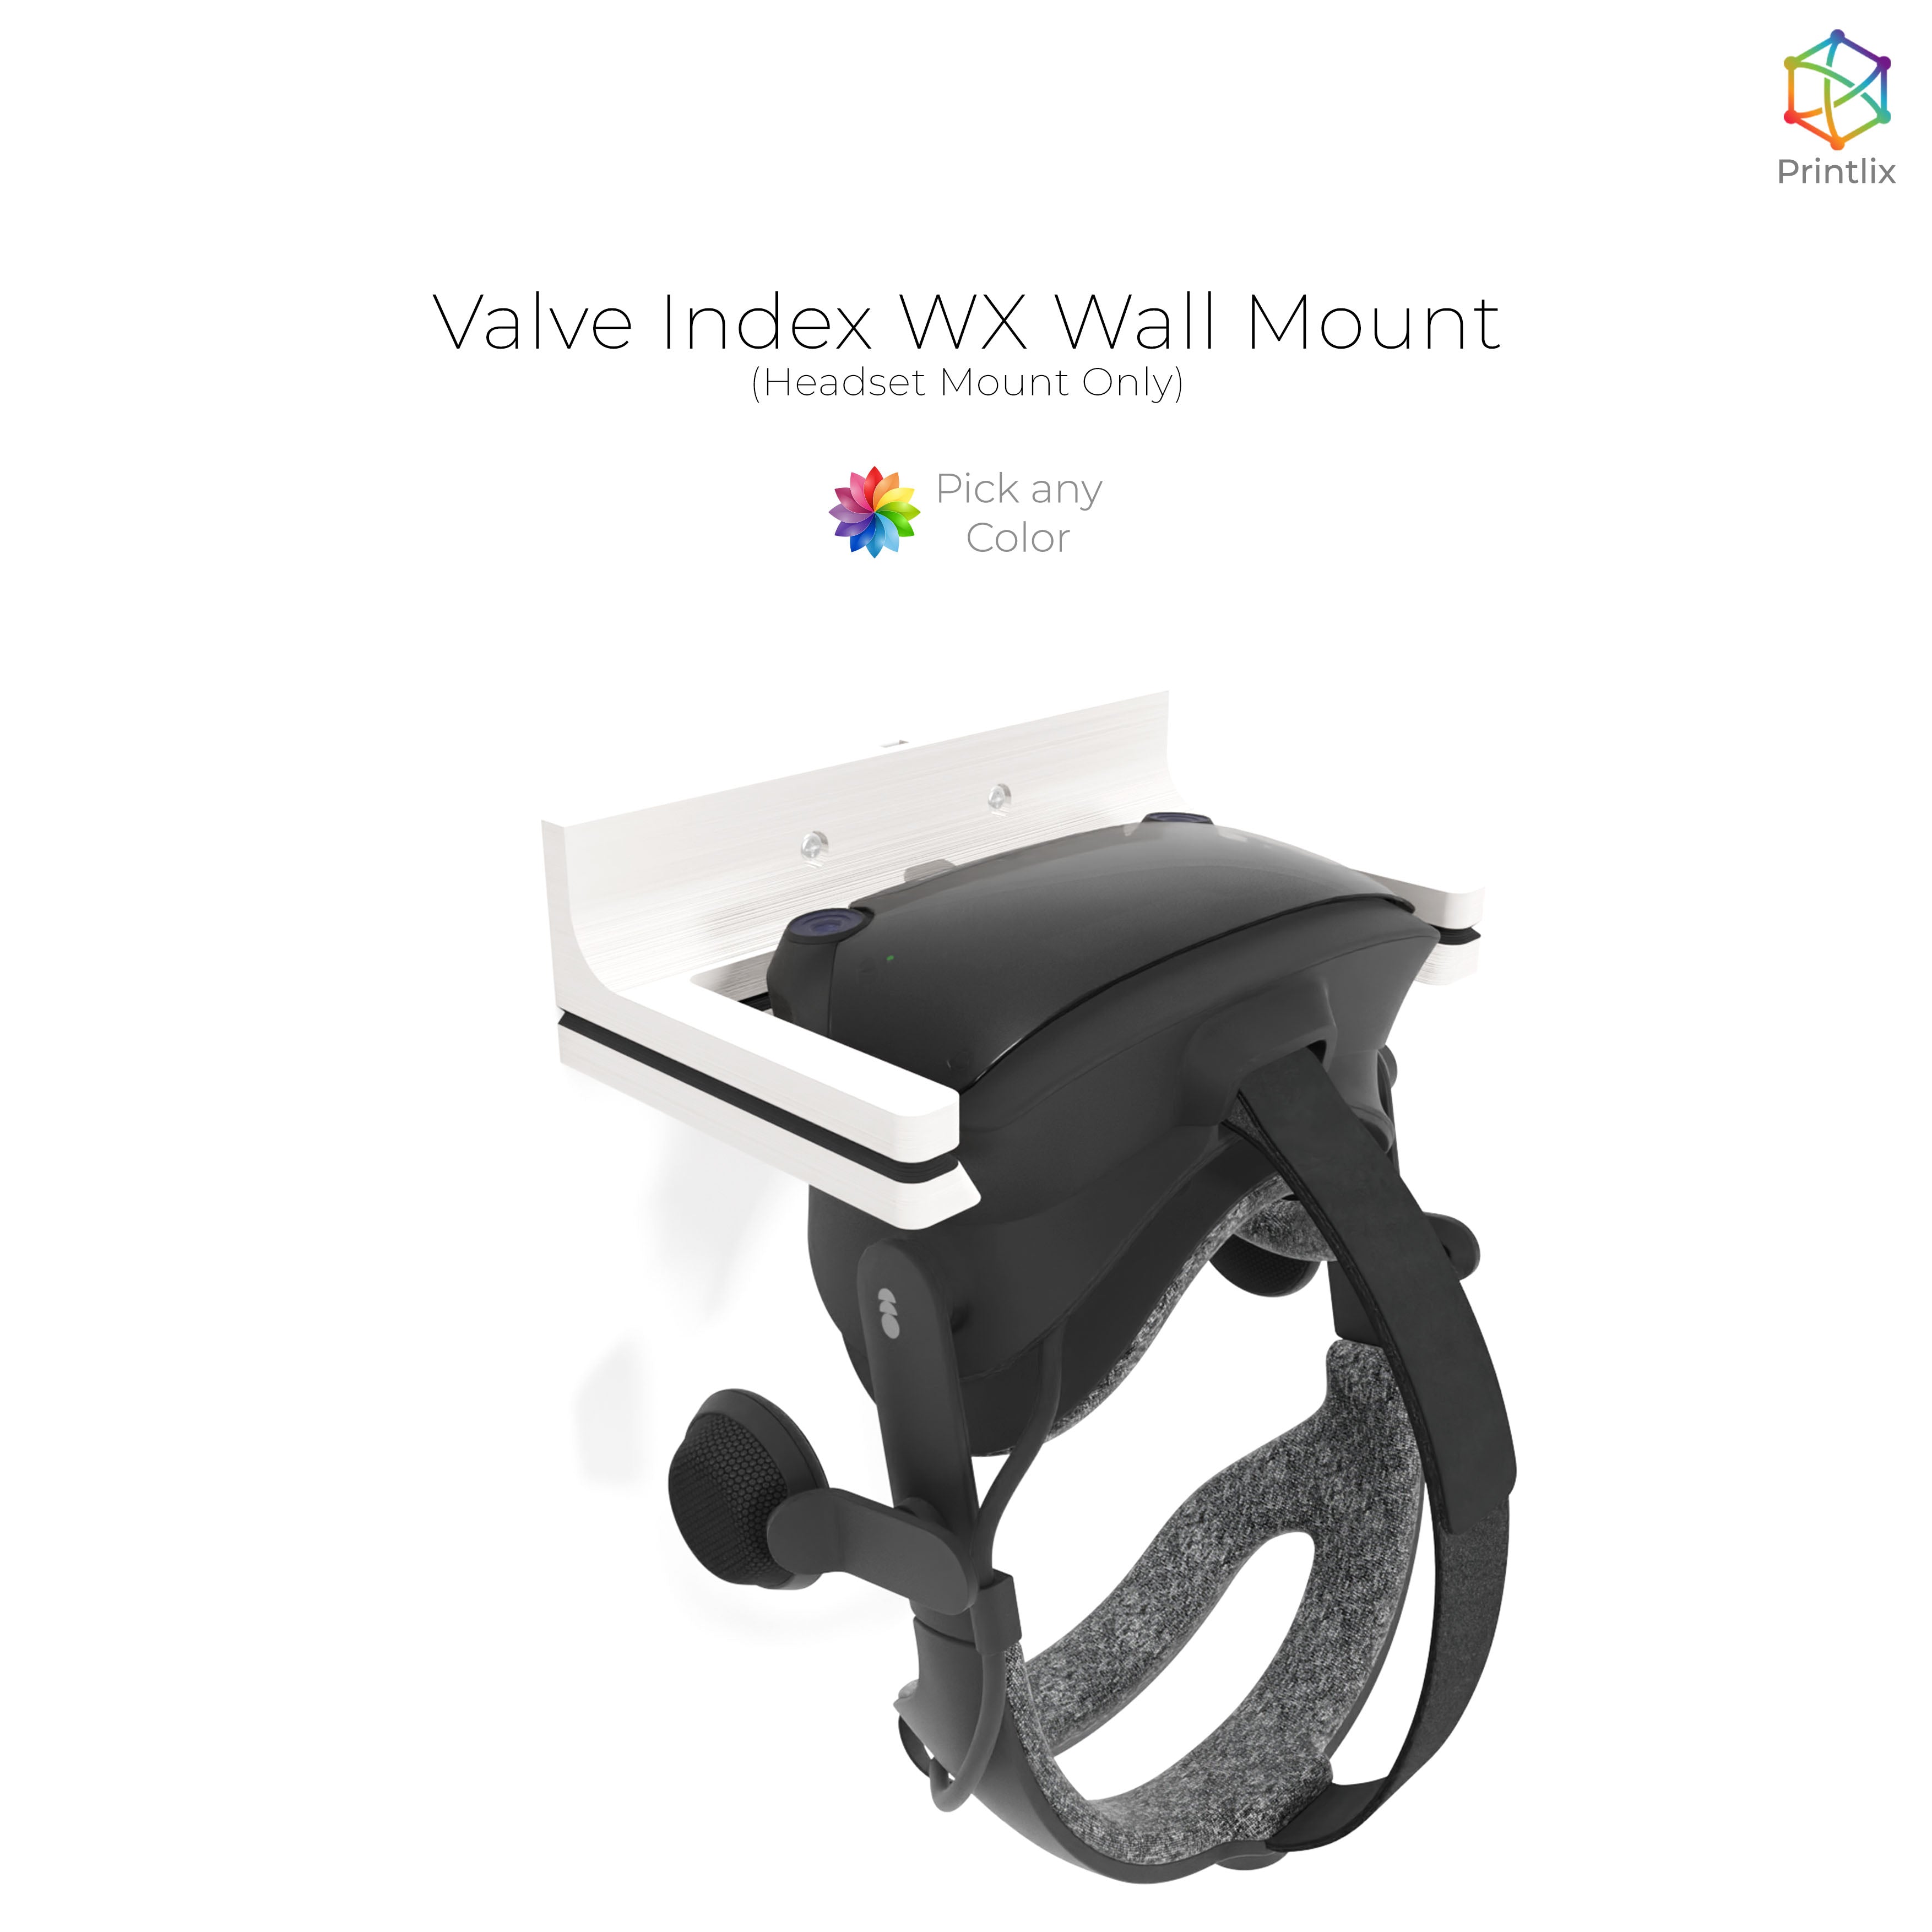 Valve Index WX Wall Mount for Valve Index Headset - PLA 3D Printed